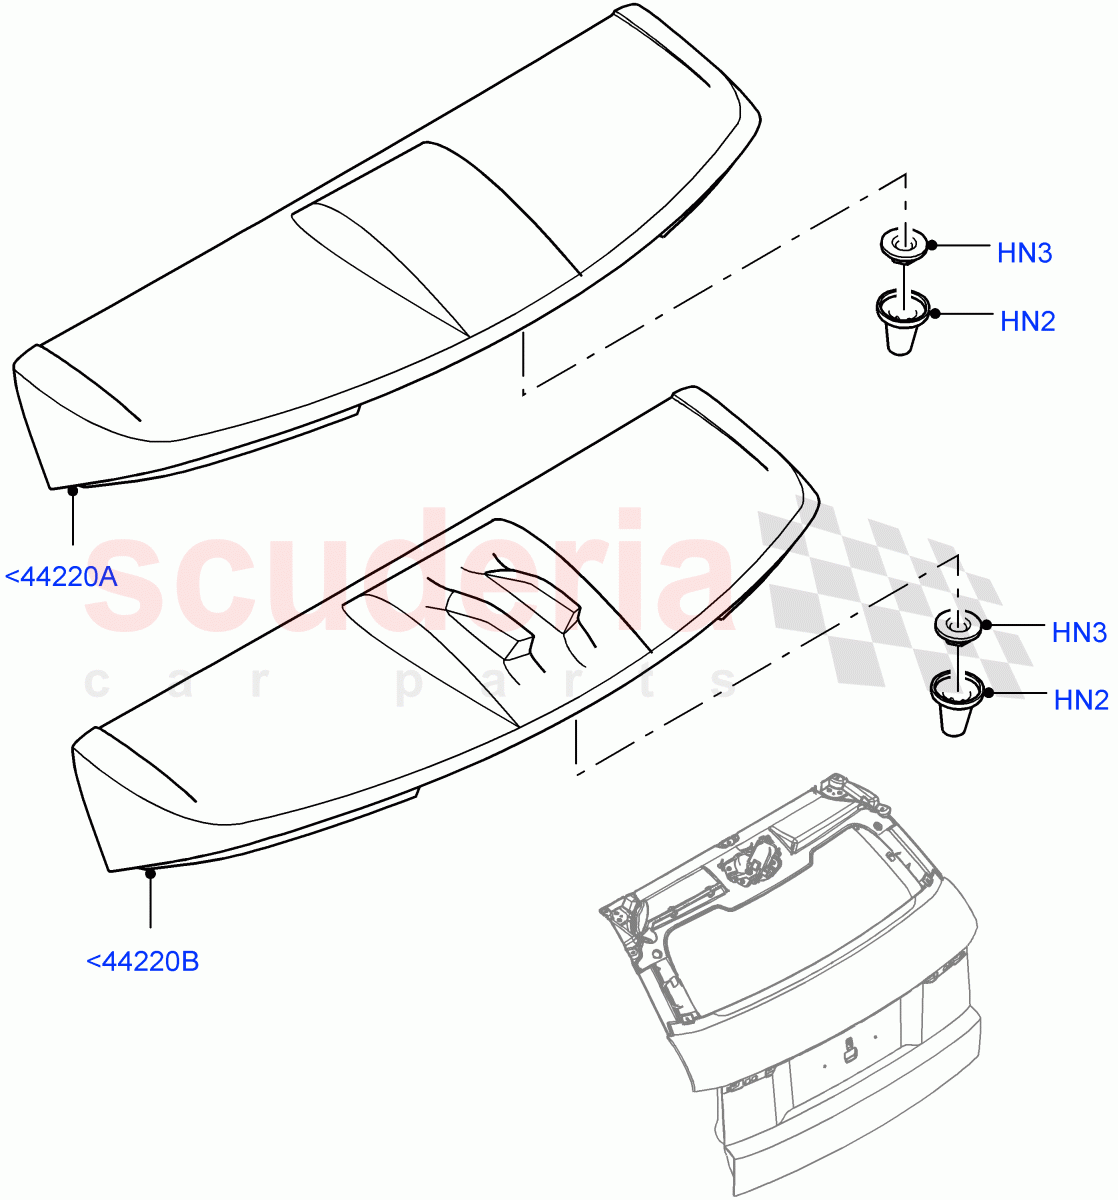 Spoiler And Related Parts(Itatiaia (Brazil))((V)FROMGT000001) of Land Rover Land Rover Range Rover Evoque (2012-2018) [2.0 Turbo Diesel]